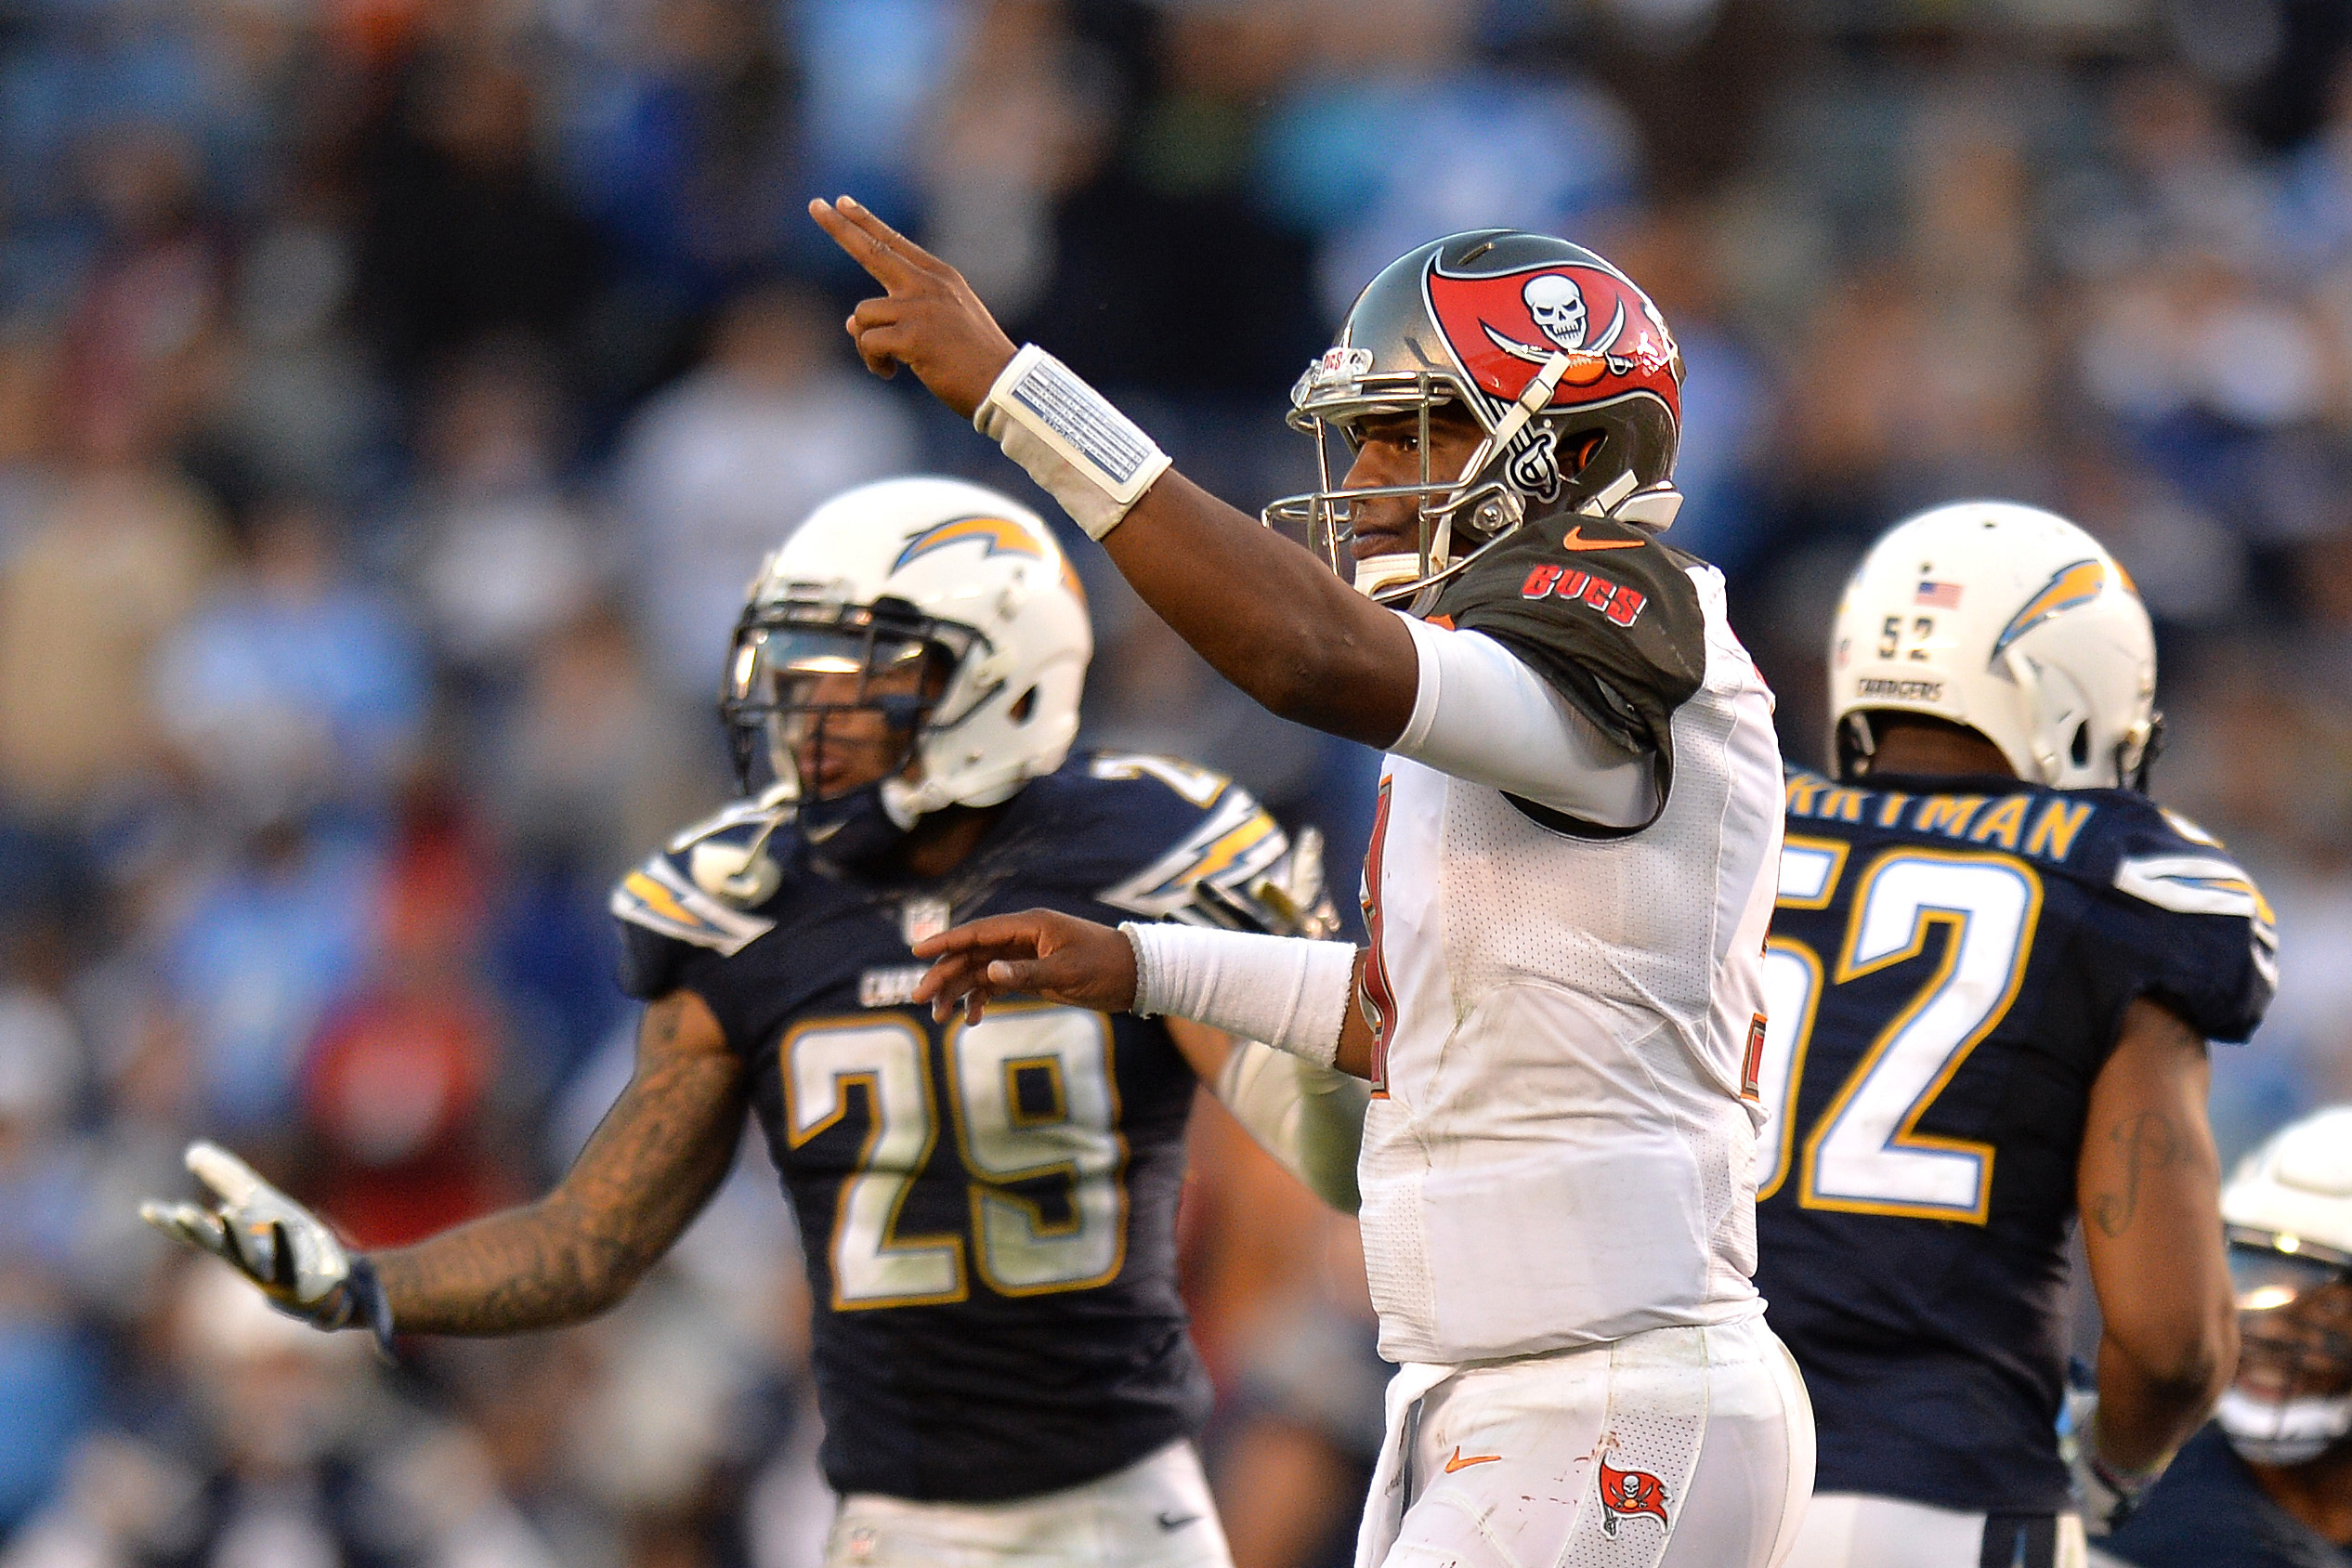 Bucs Tied For First Place In NFC South - ESPN 98.1 FM - 850 AM WRUF